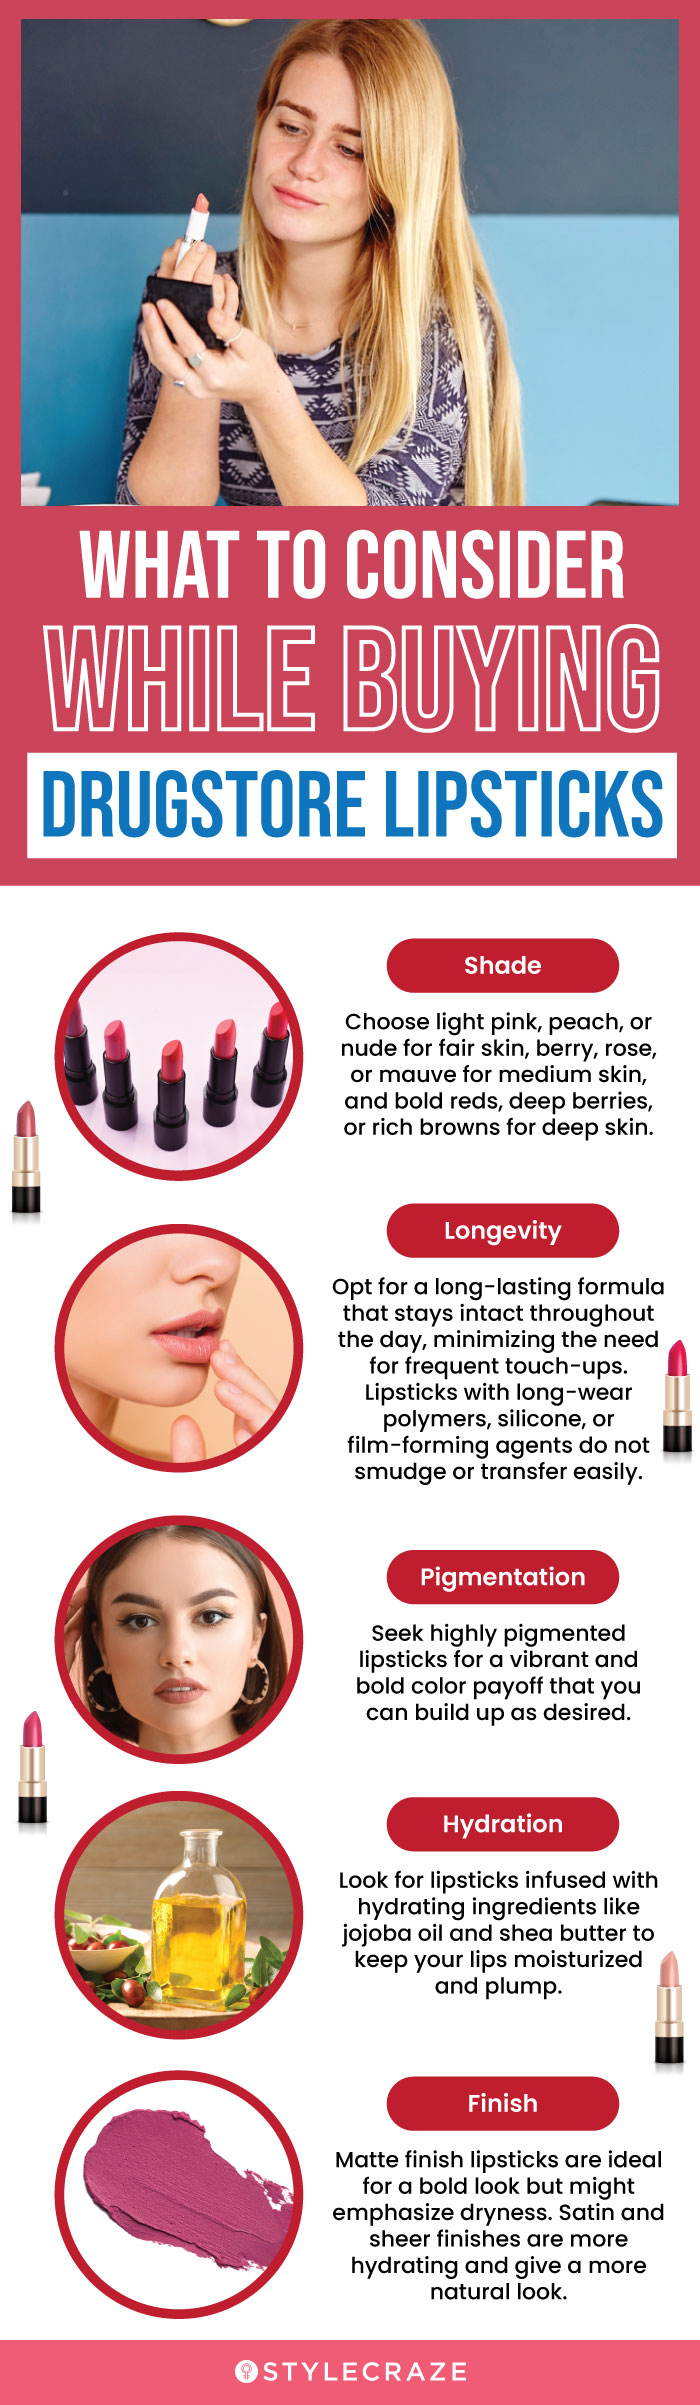 What To Consider While Buying Drugstore Lipsticks(infographic)